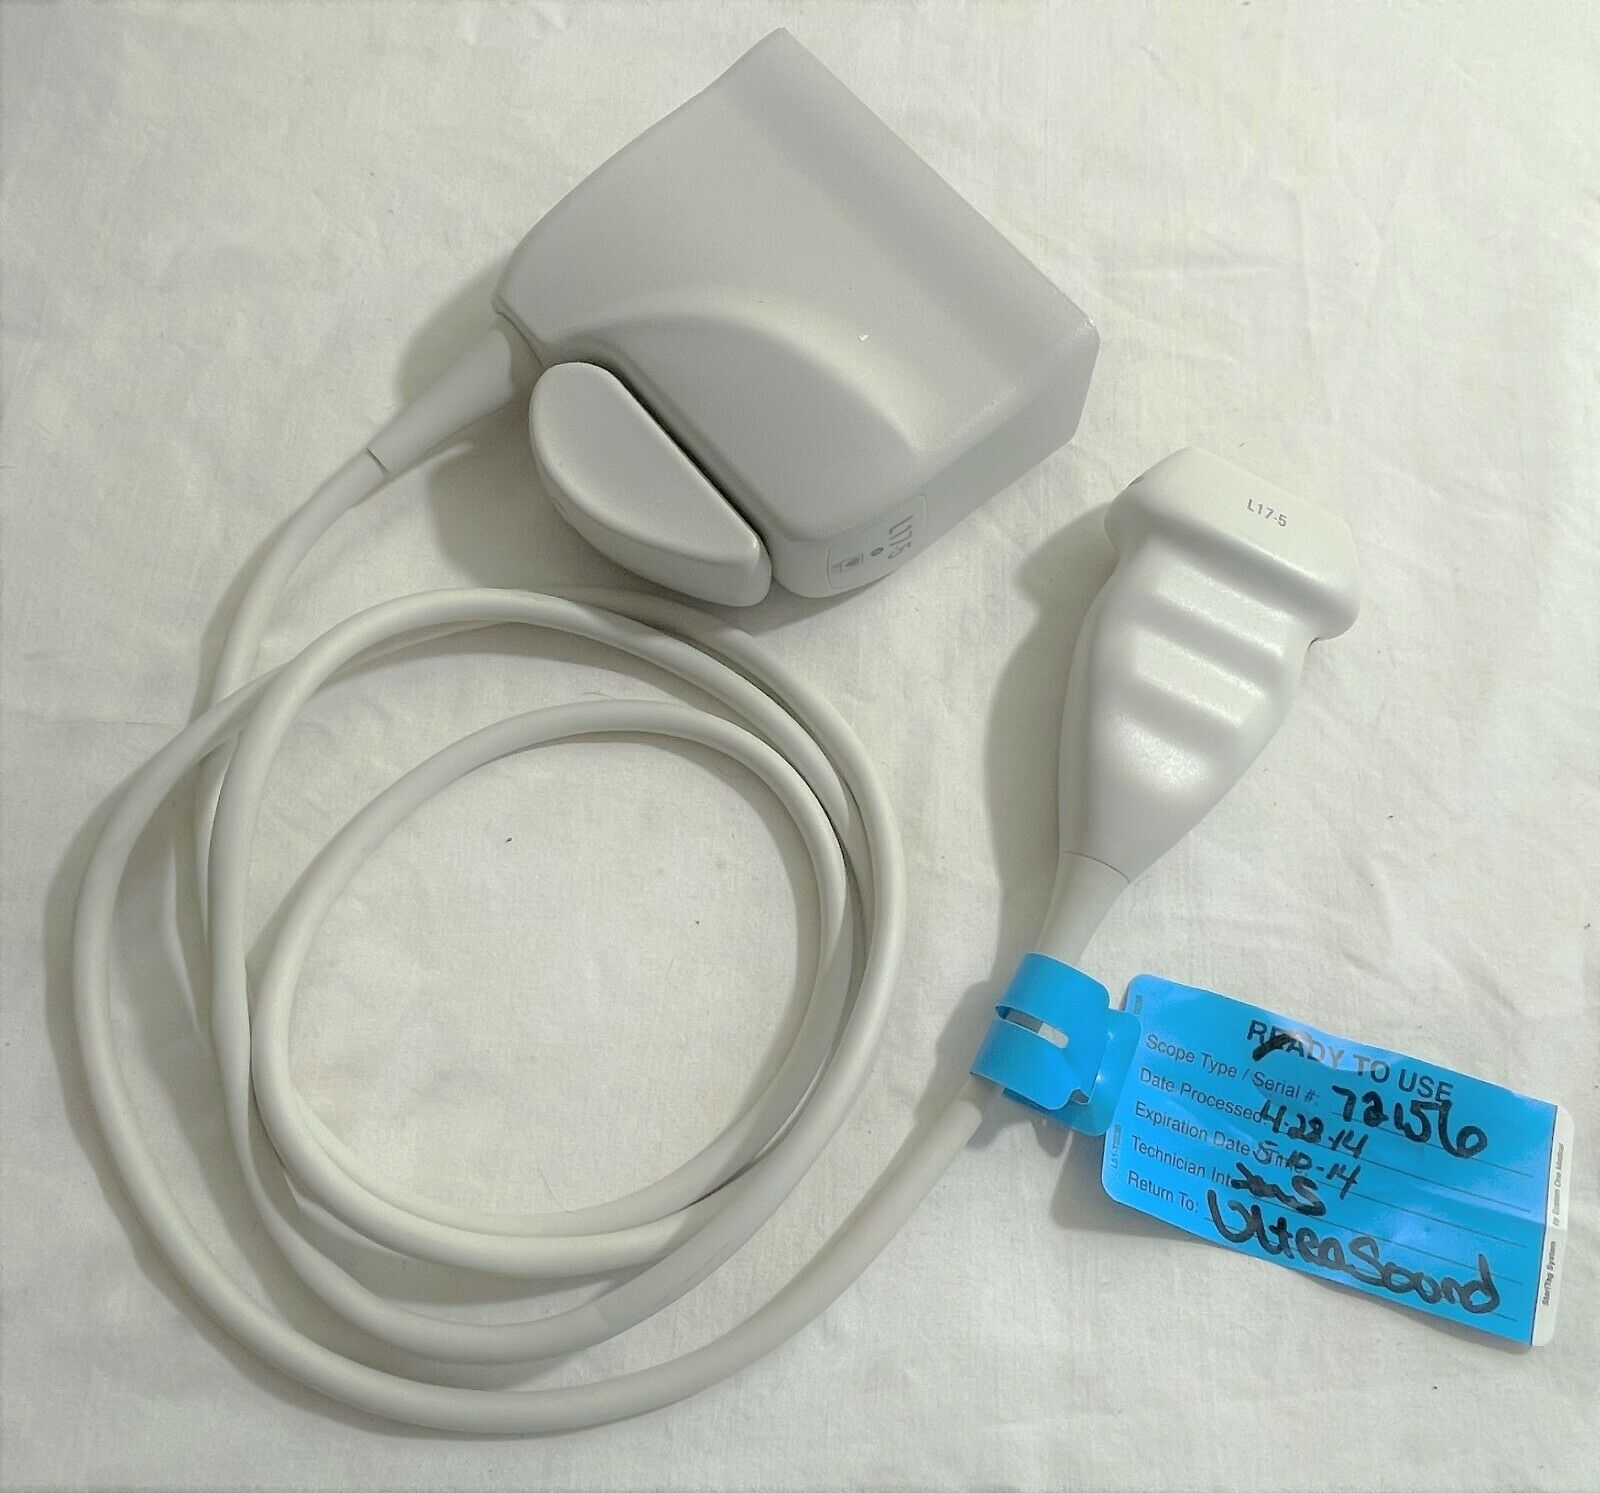 Philips L17-5 Linear Array Ultrasound Probe Transducer Censitrac iU22 DIAGNOSTIC ULTRASOUND MACHINES FOR SALE